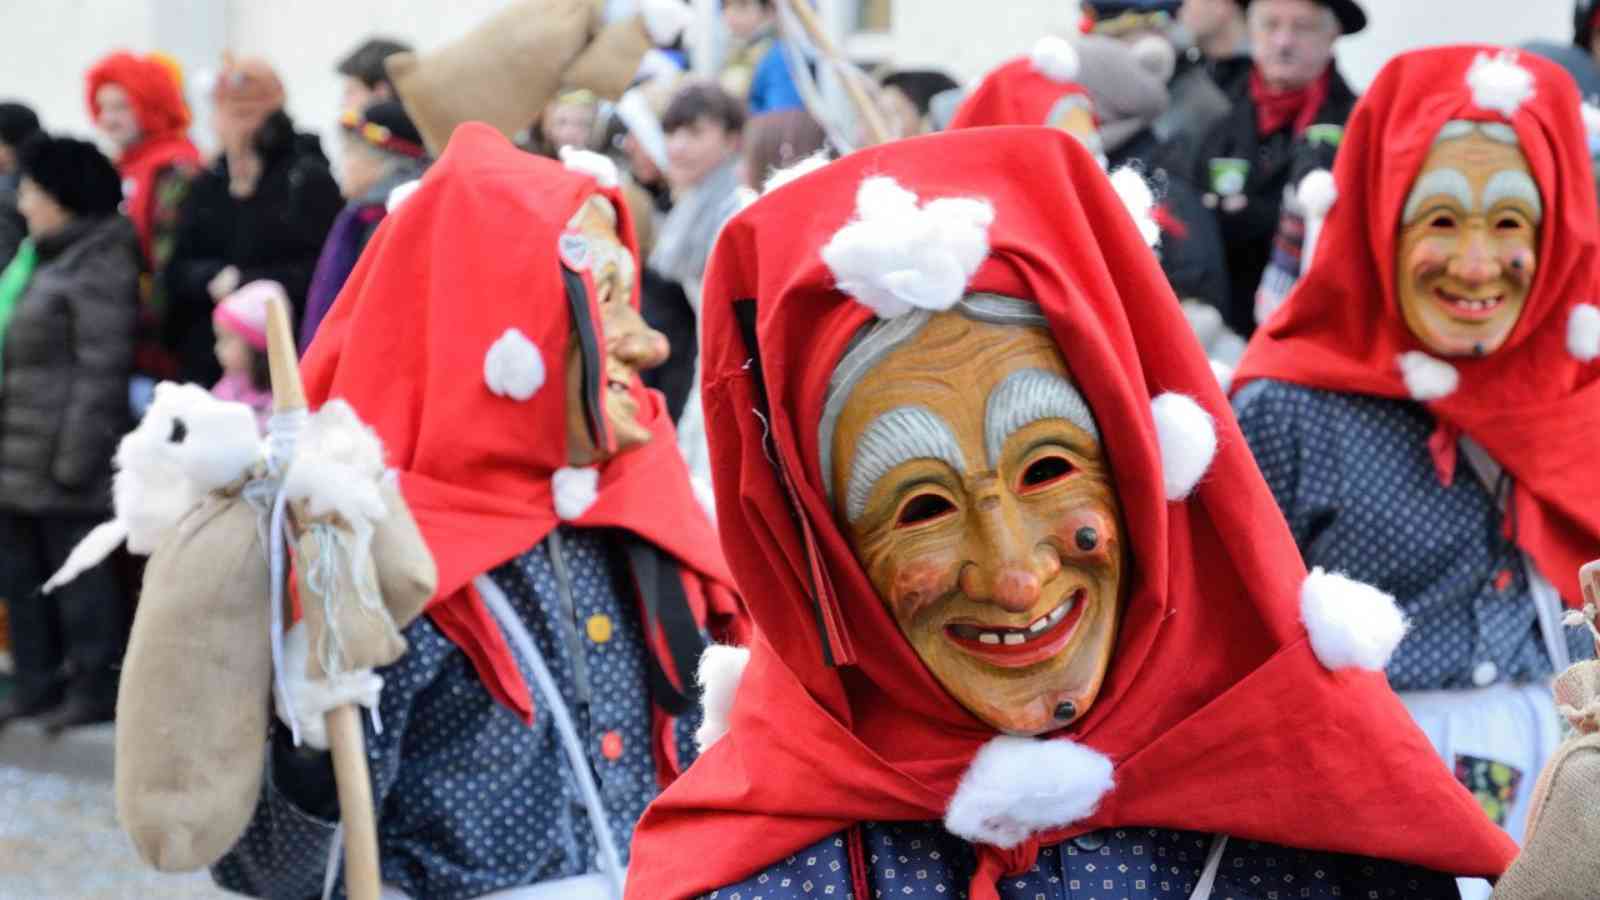 Fasching 2023: Date, History, Facts about Fasching